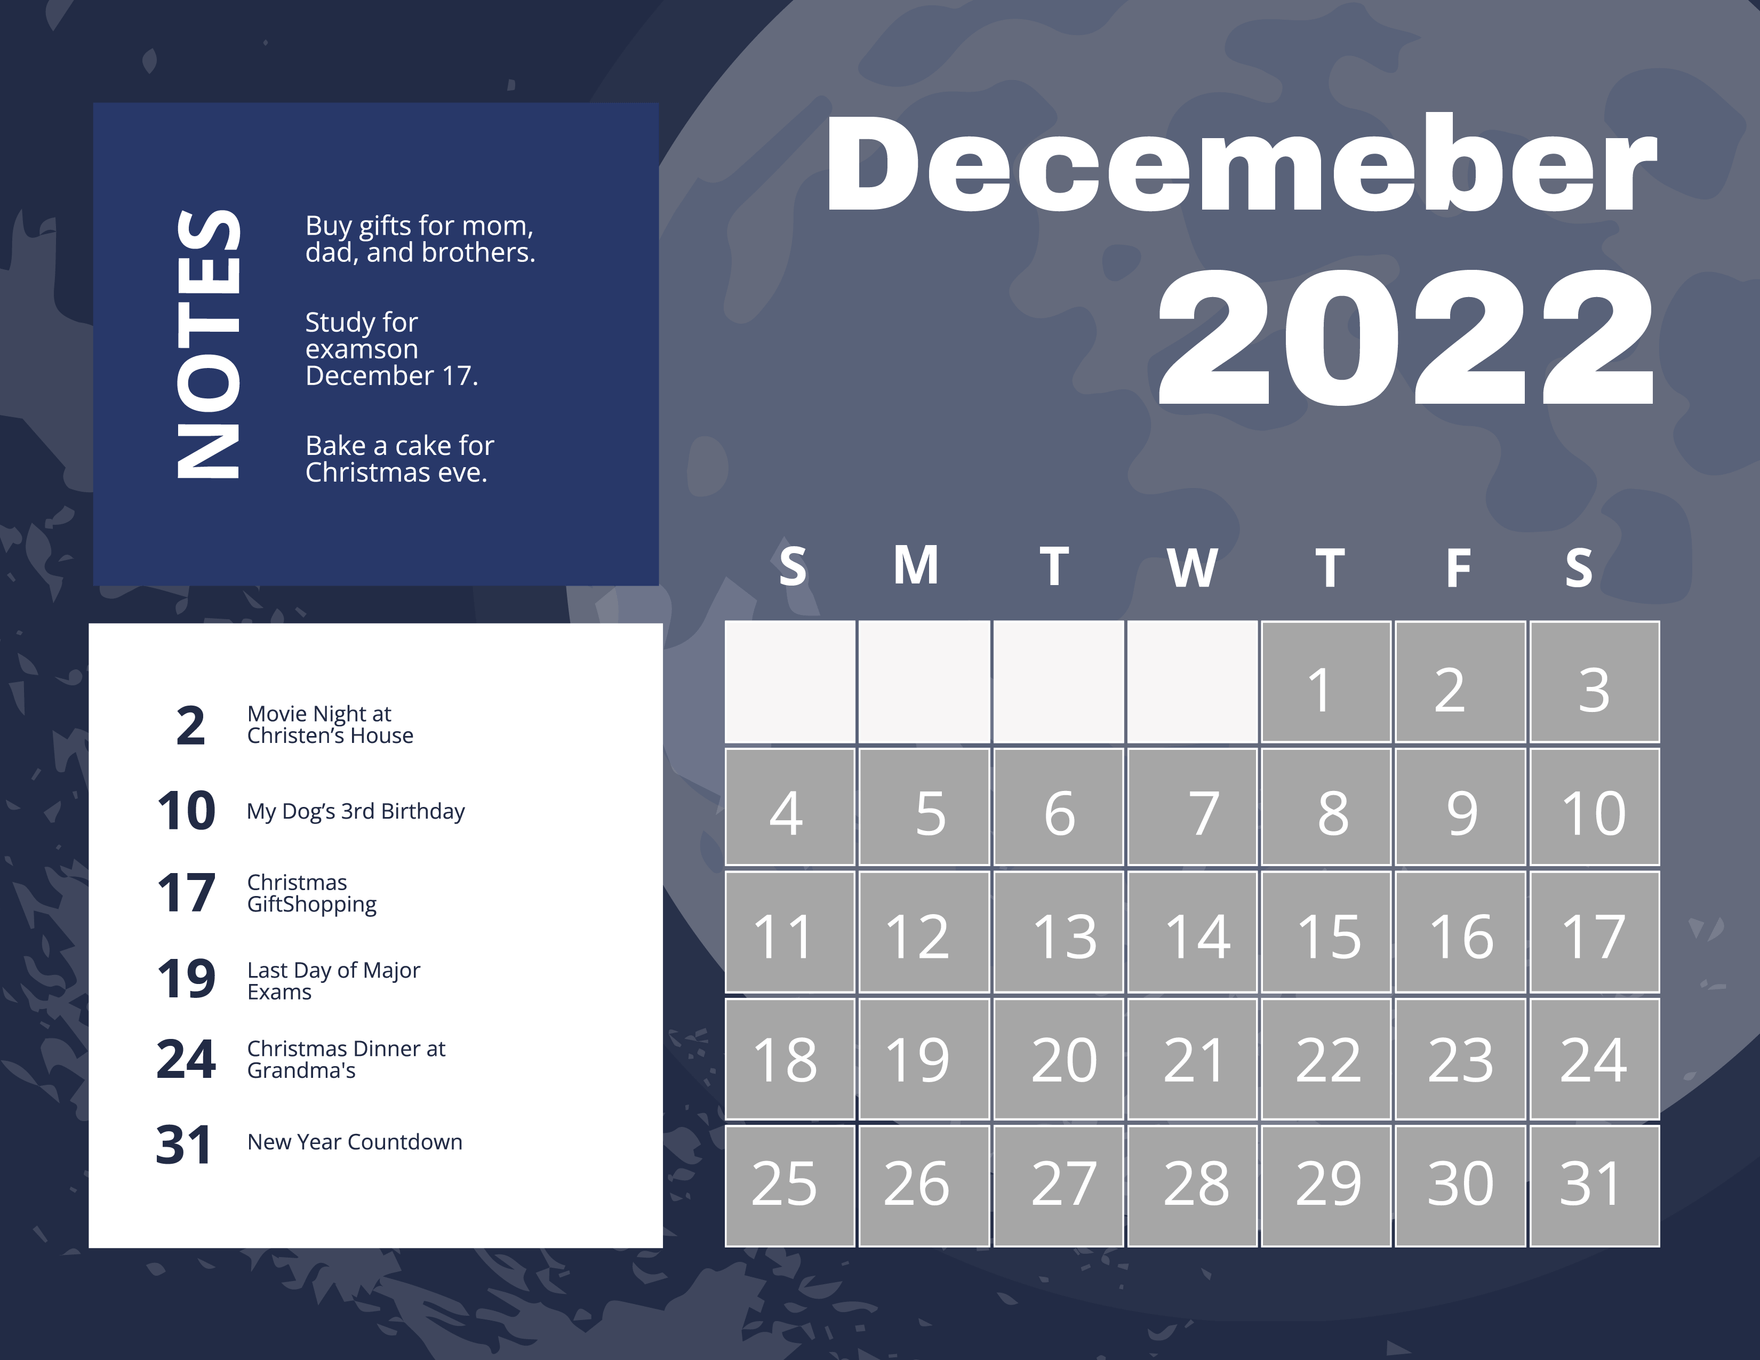 December 2022 Calendar Template With Moon Phases in Word, Illustrator, PSD